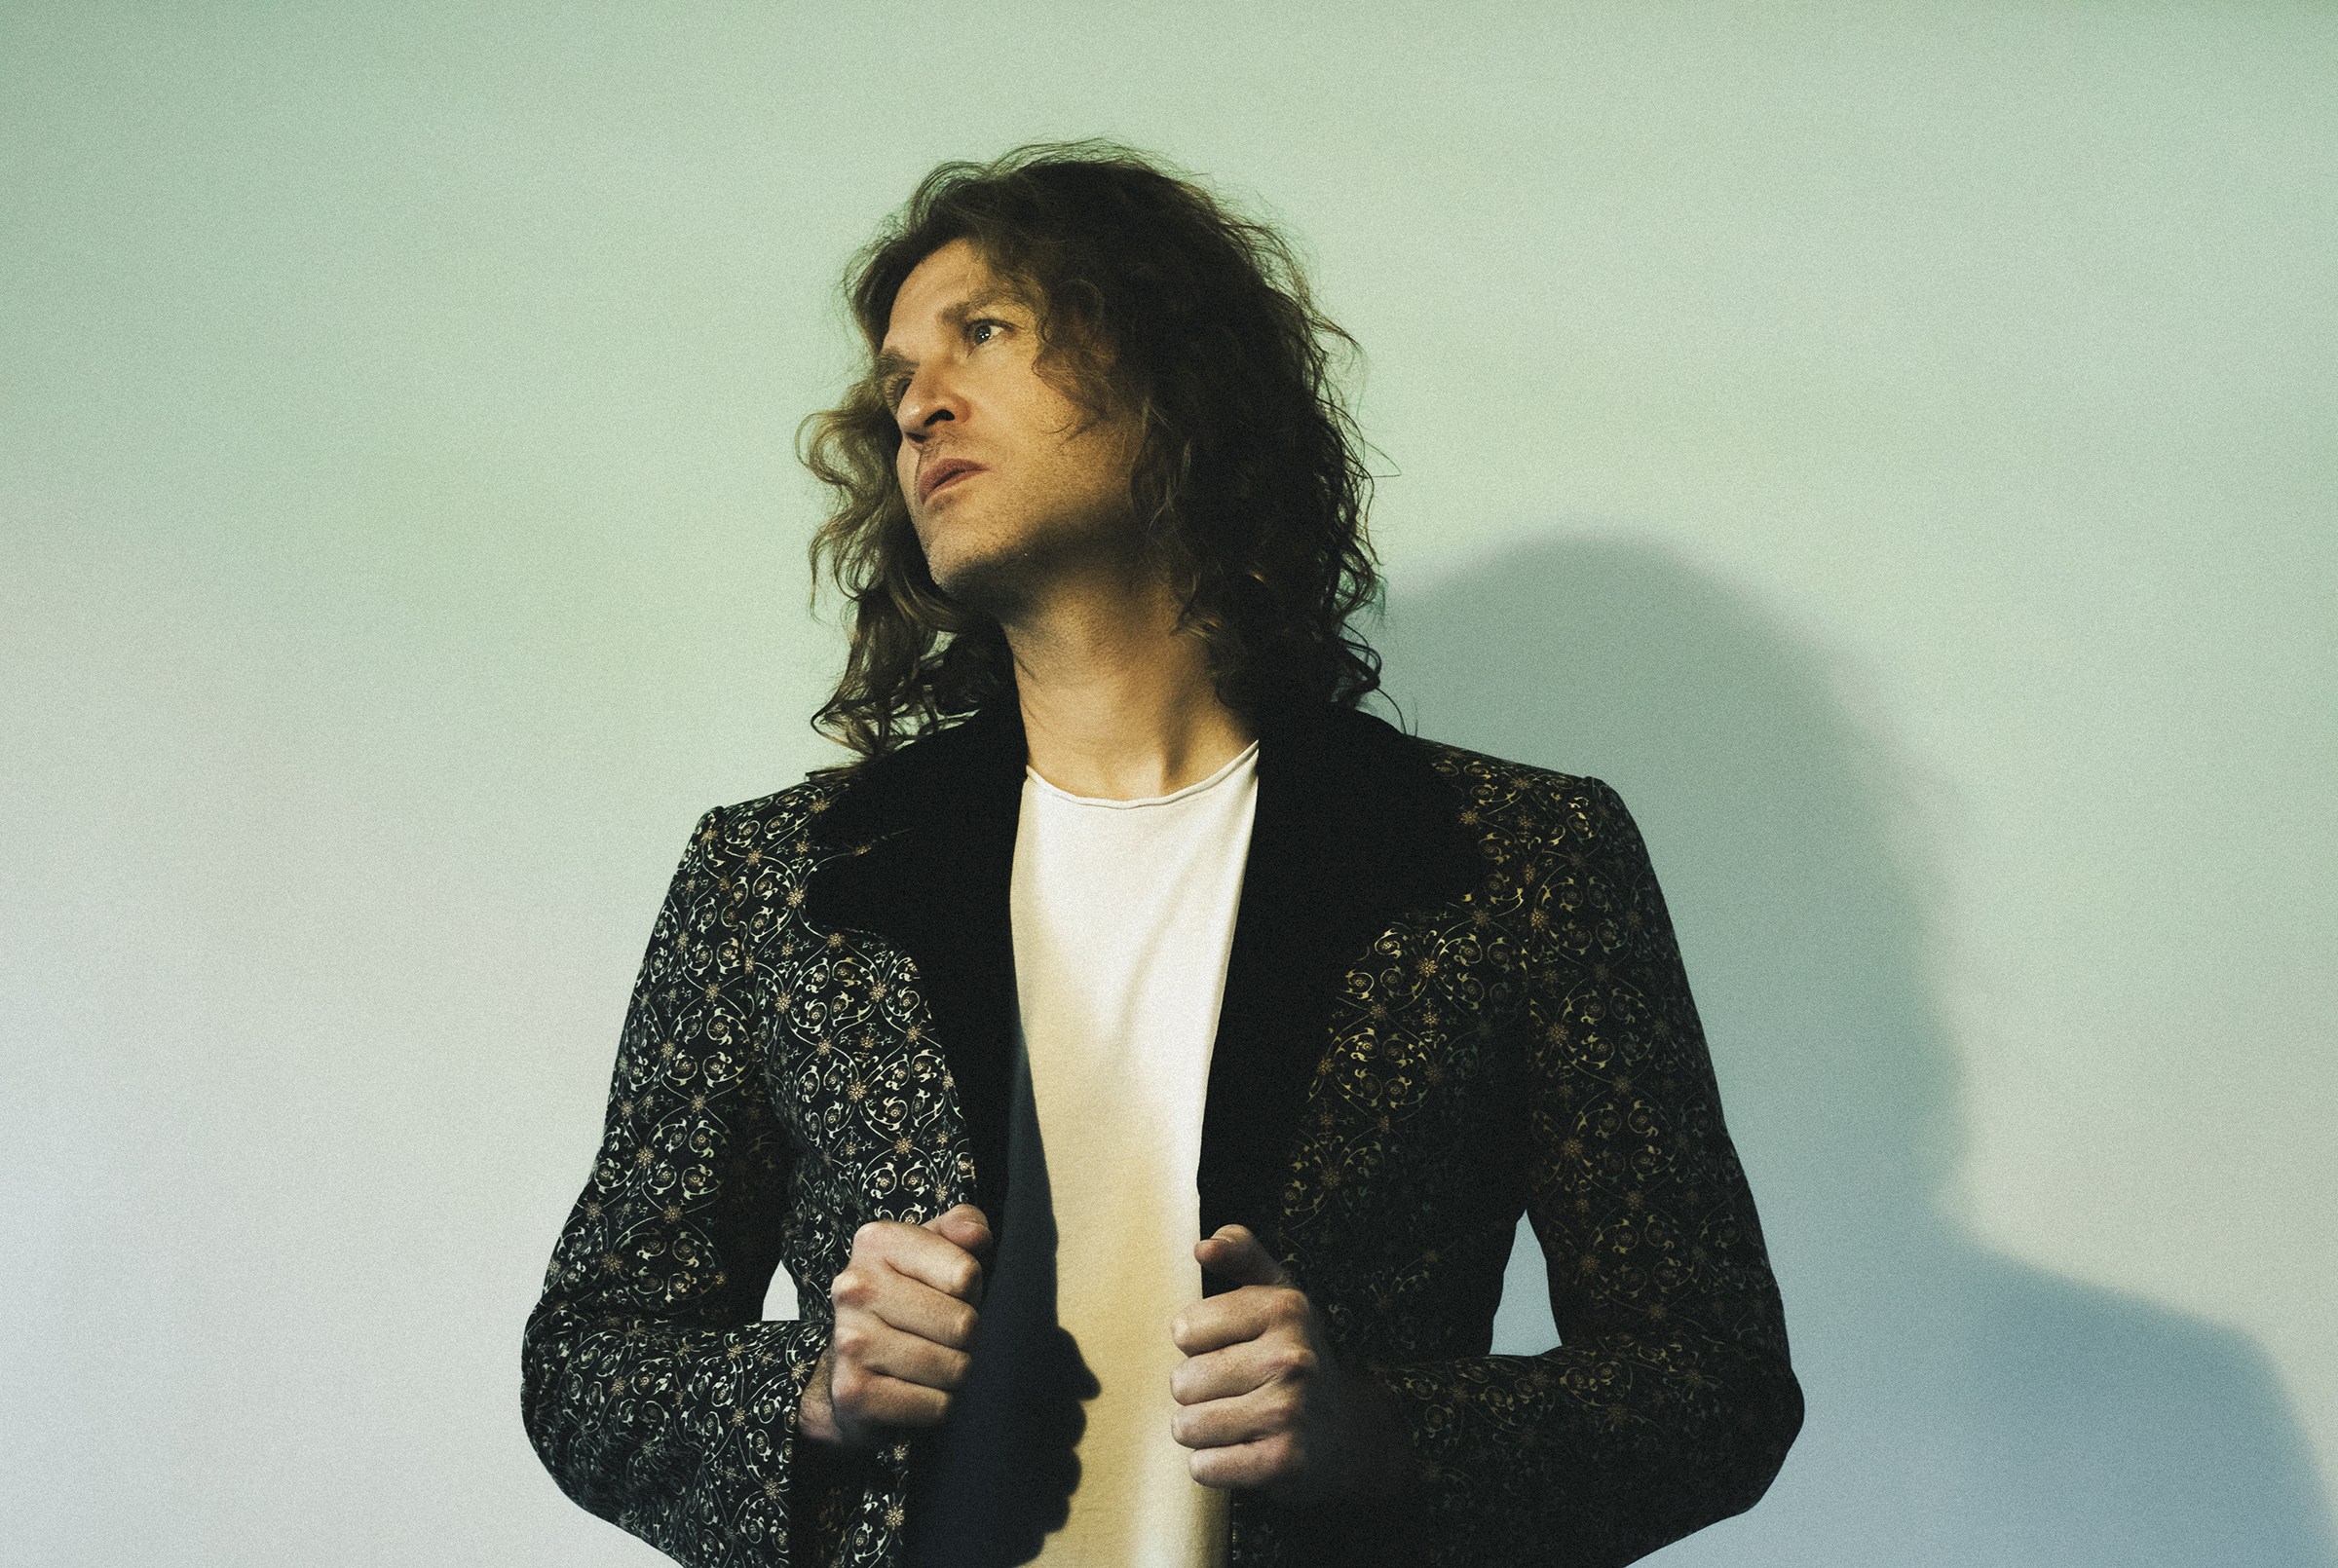 The Killers' DAVE KEUNING shares video for 'Time and Fury' from his forthcoming solo album, out 25th June 2